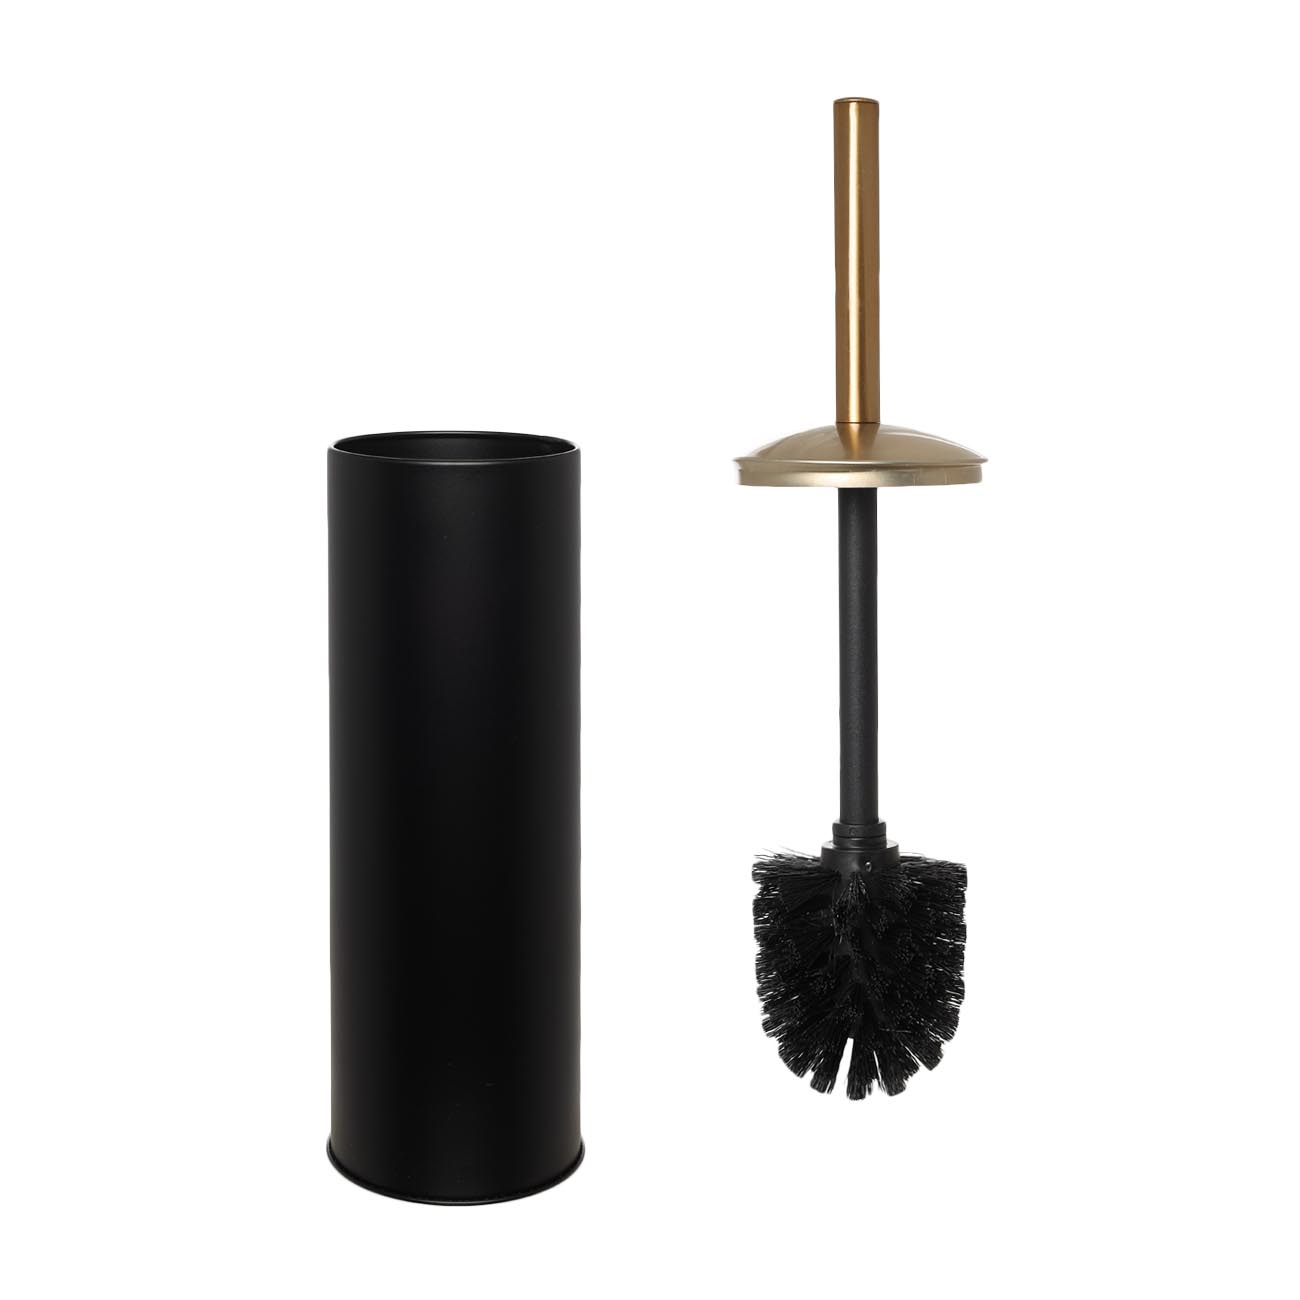 Toilet brush, 28 cm, with stand, plastic / metal, black and gold, Black chic изображение № 2